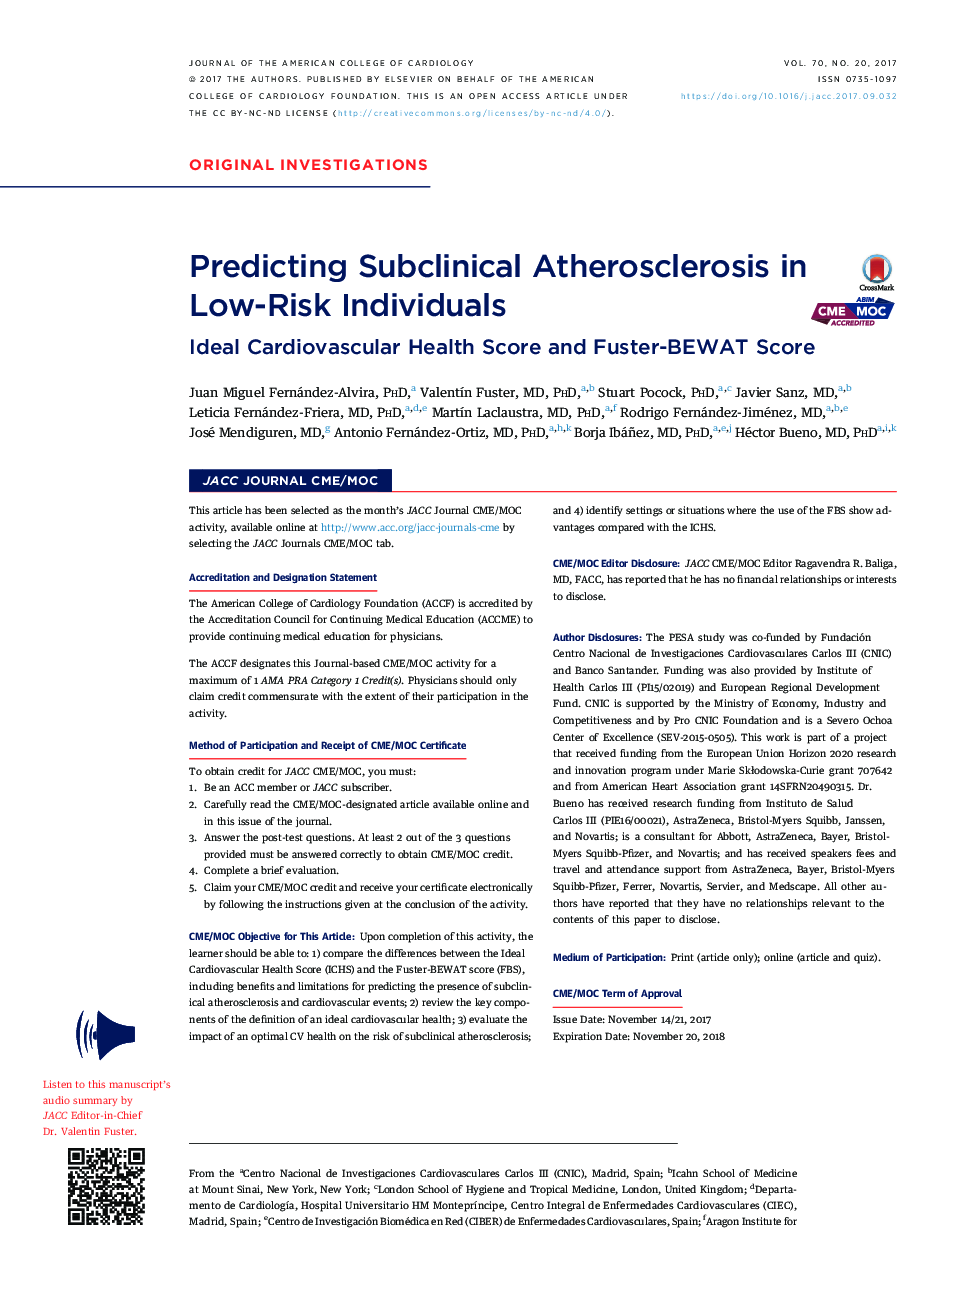 Predicting Subclinical Atherosclerosis in Low-RiskÂ Individuals